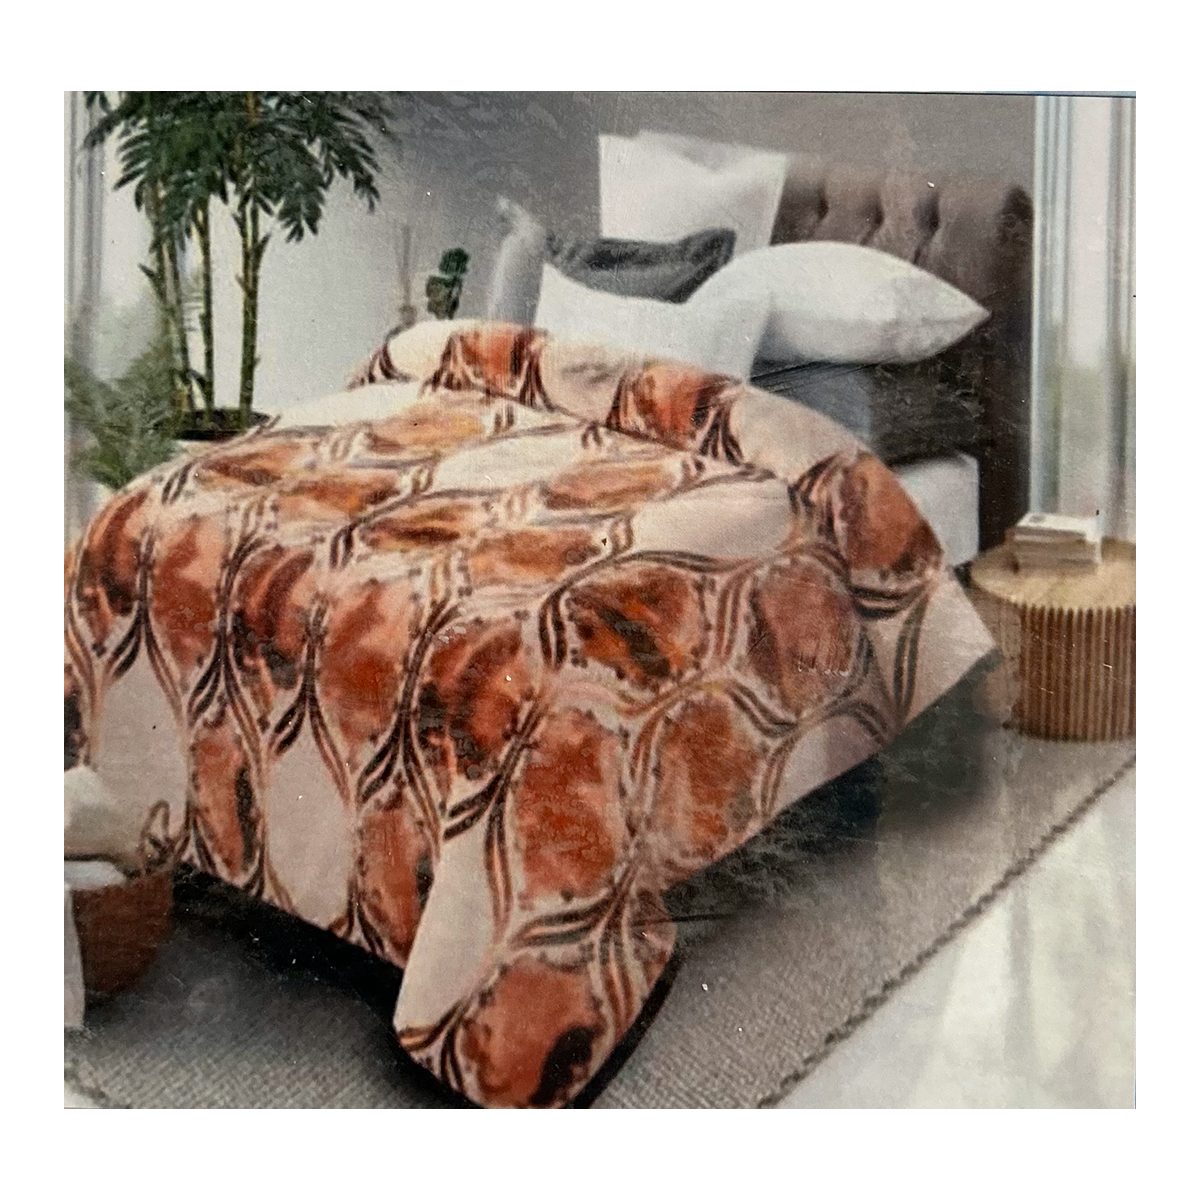 Home Well Double Size Flannel Blanket Assorted Colour and Assorted Design